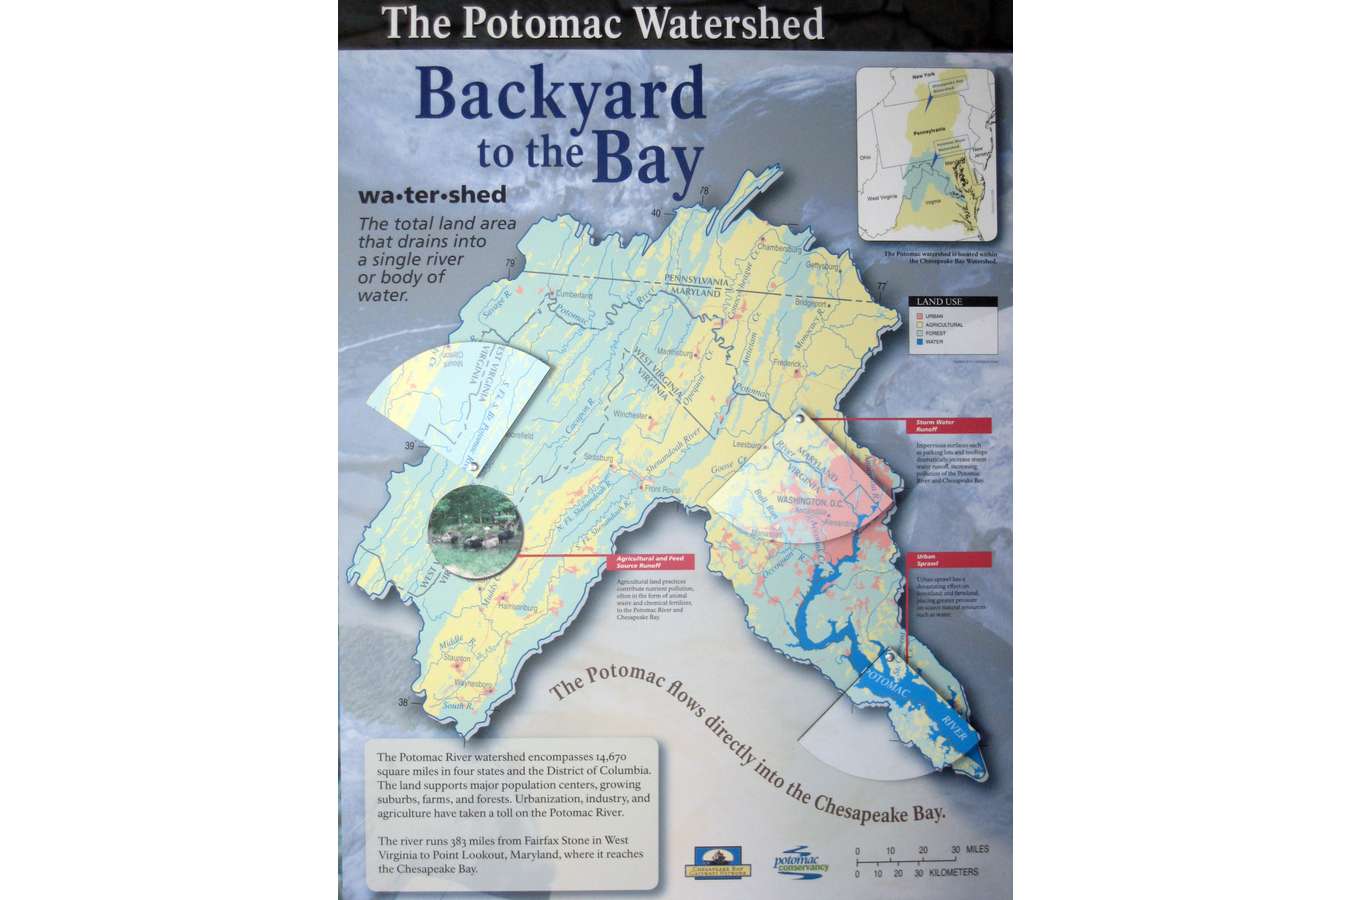 1Bckyrd2bay : Backyard to the Bay Maps the Potomac River Watershed with Wedge-shape Reveal Windows